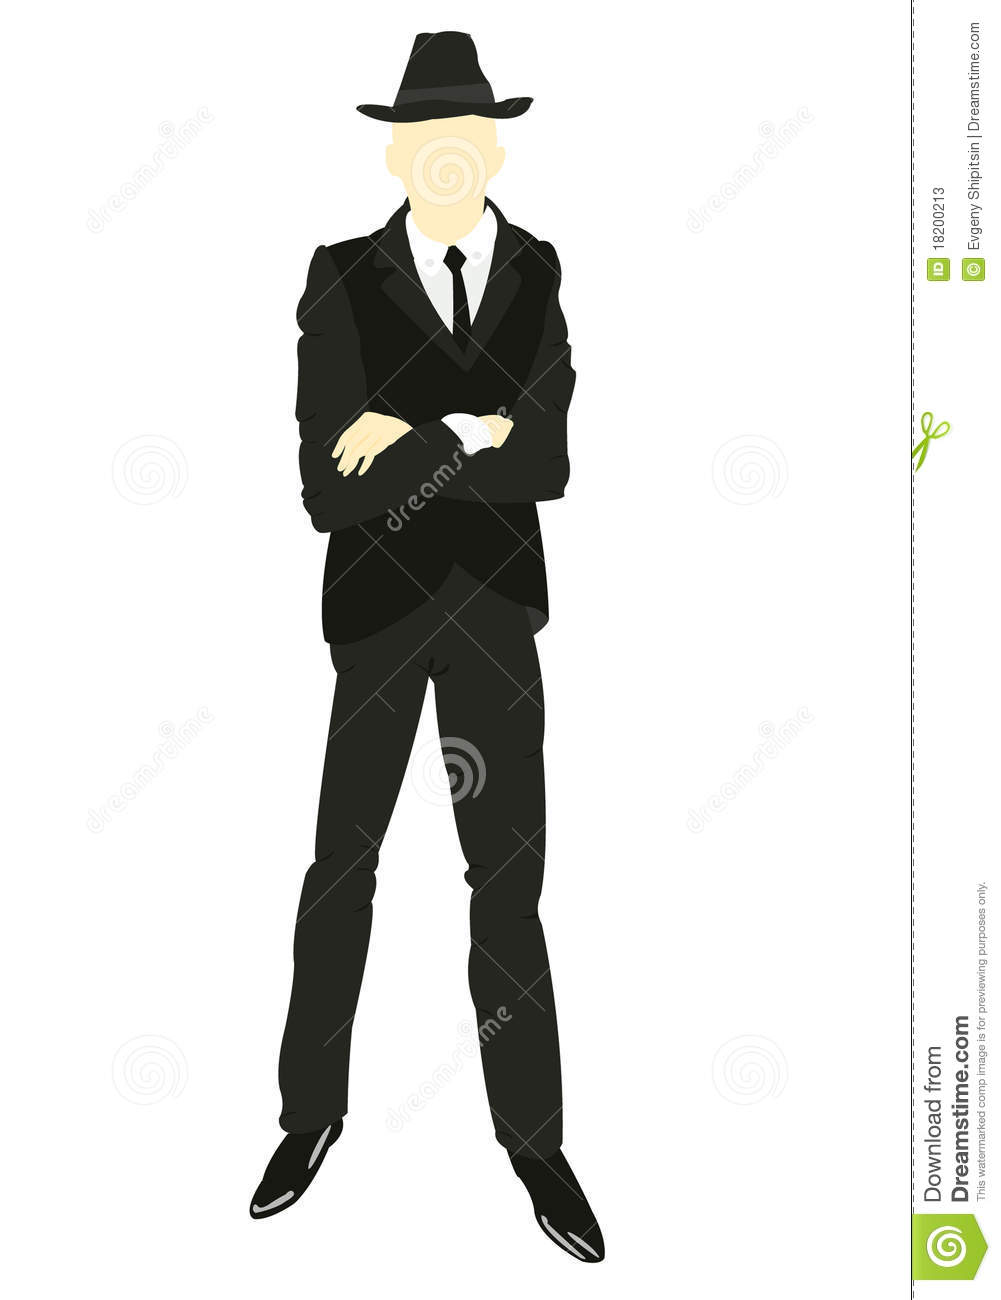 Of Black Man In Suit Silhouette Clipart   Cliparthut   Free Clipart